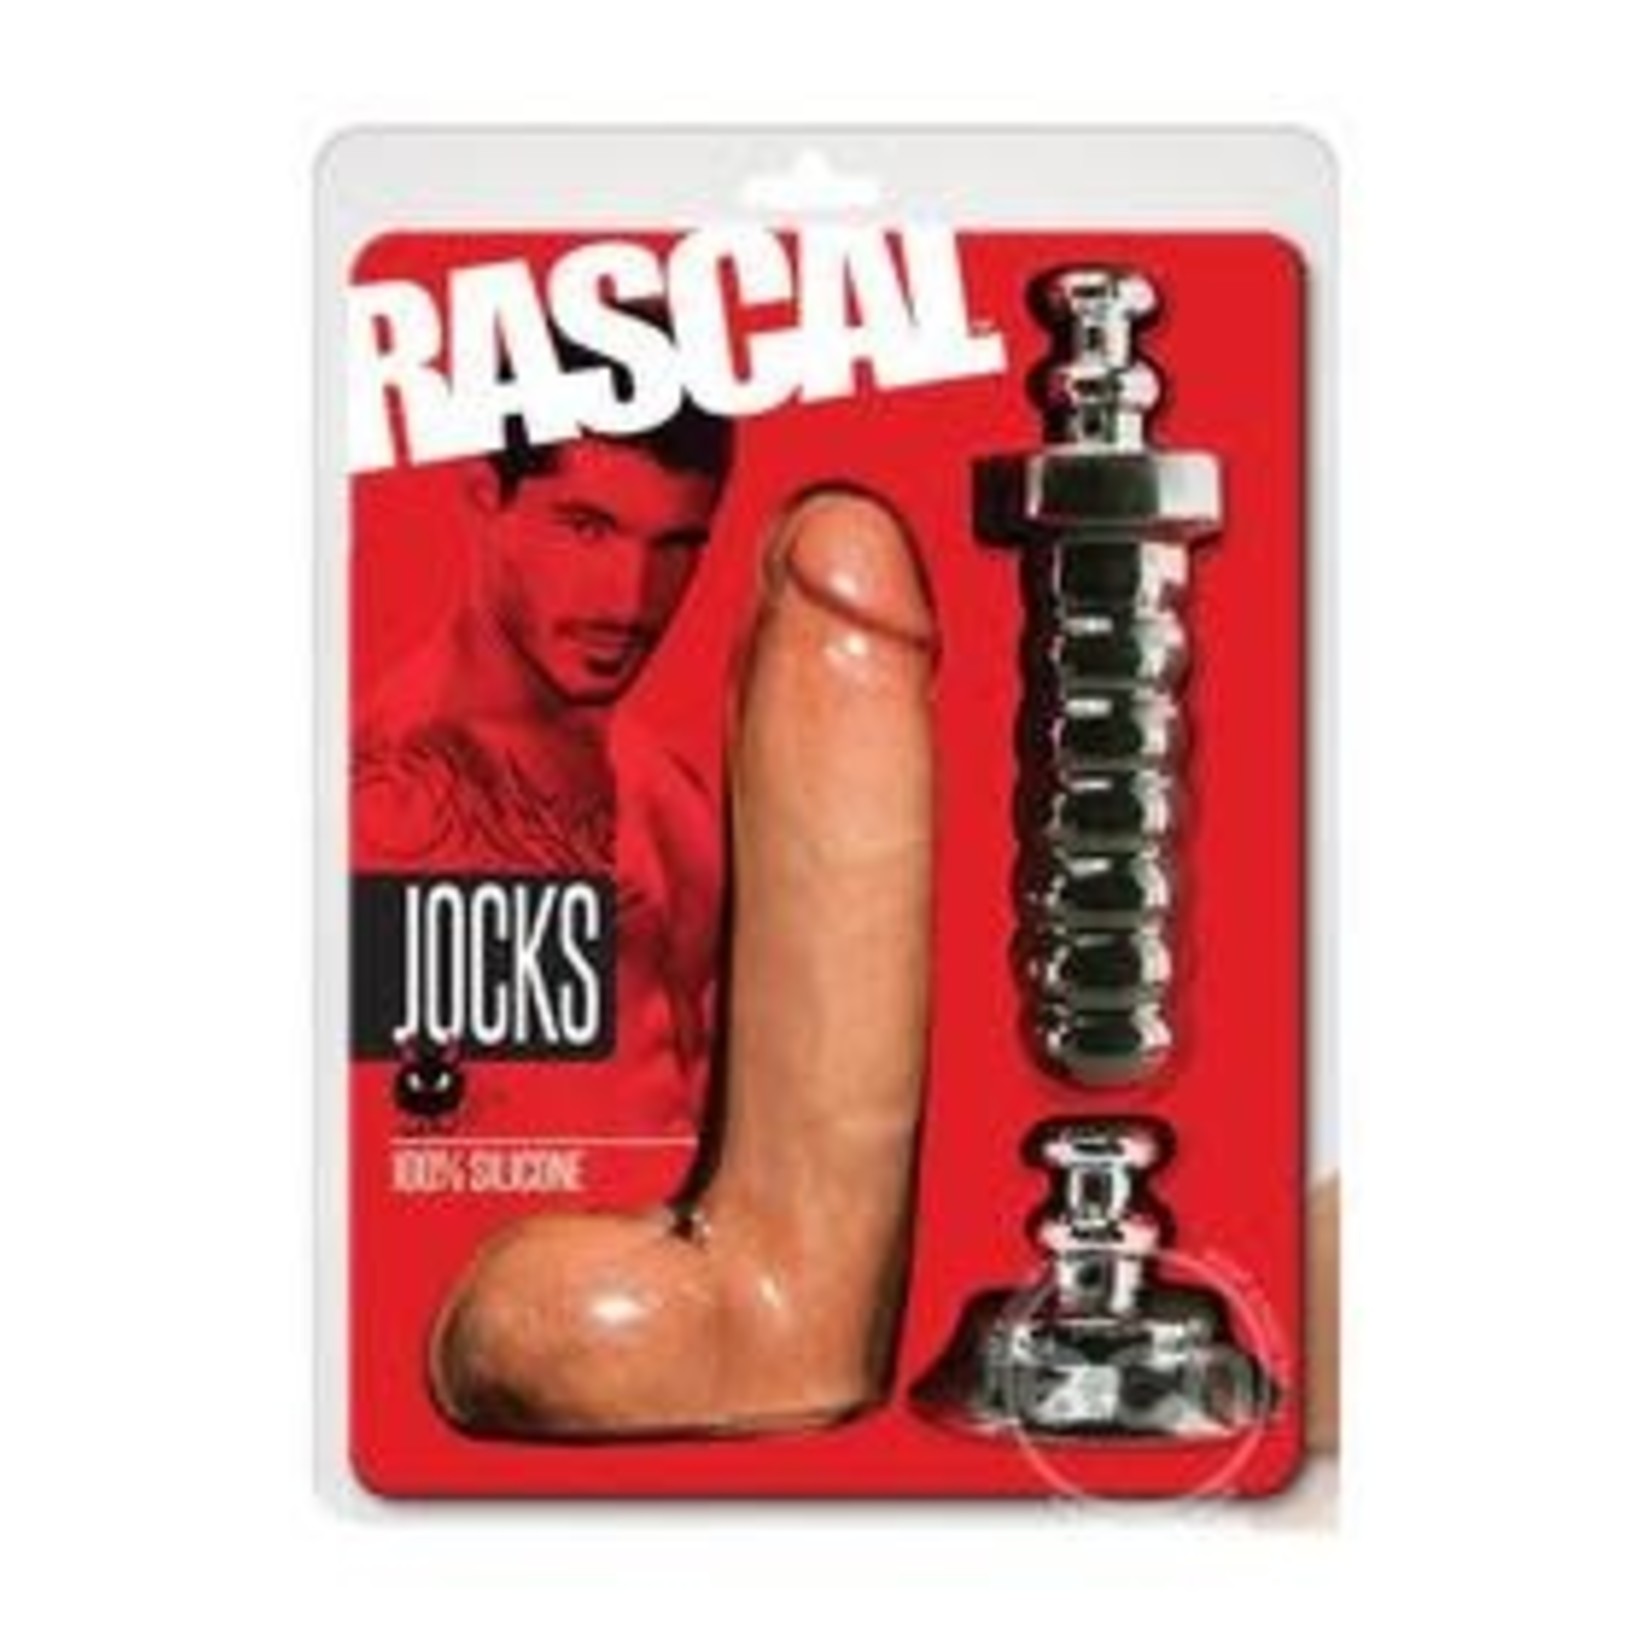 Rascal Jocks Johnny 8 Inch Silicone Dildo with Handle or Suction Cup Base  Flesh